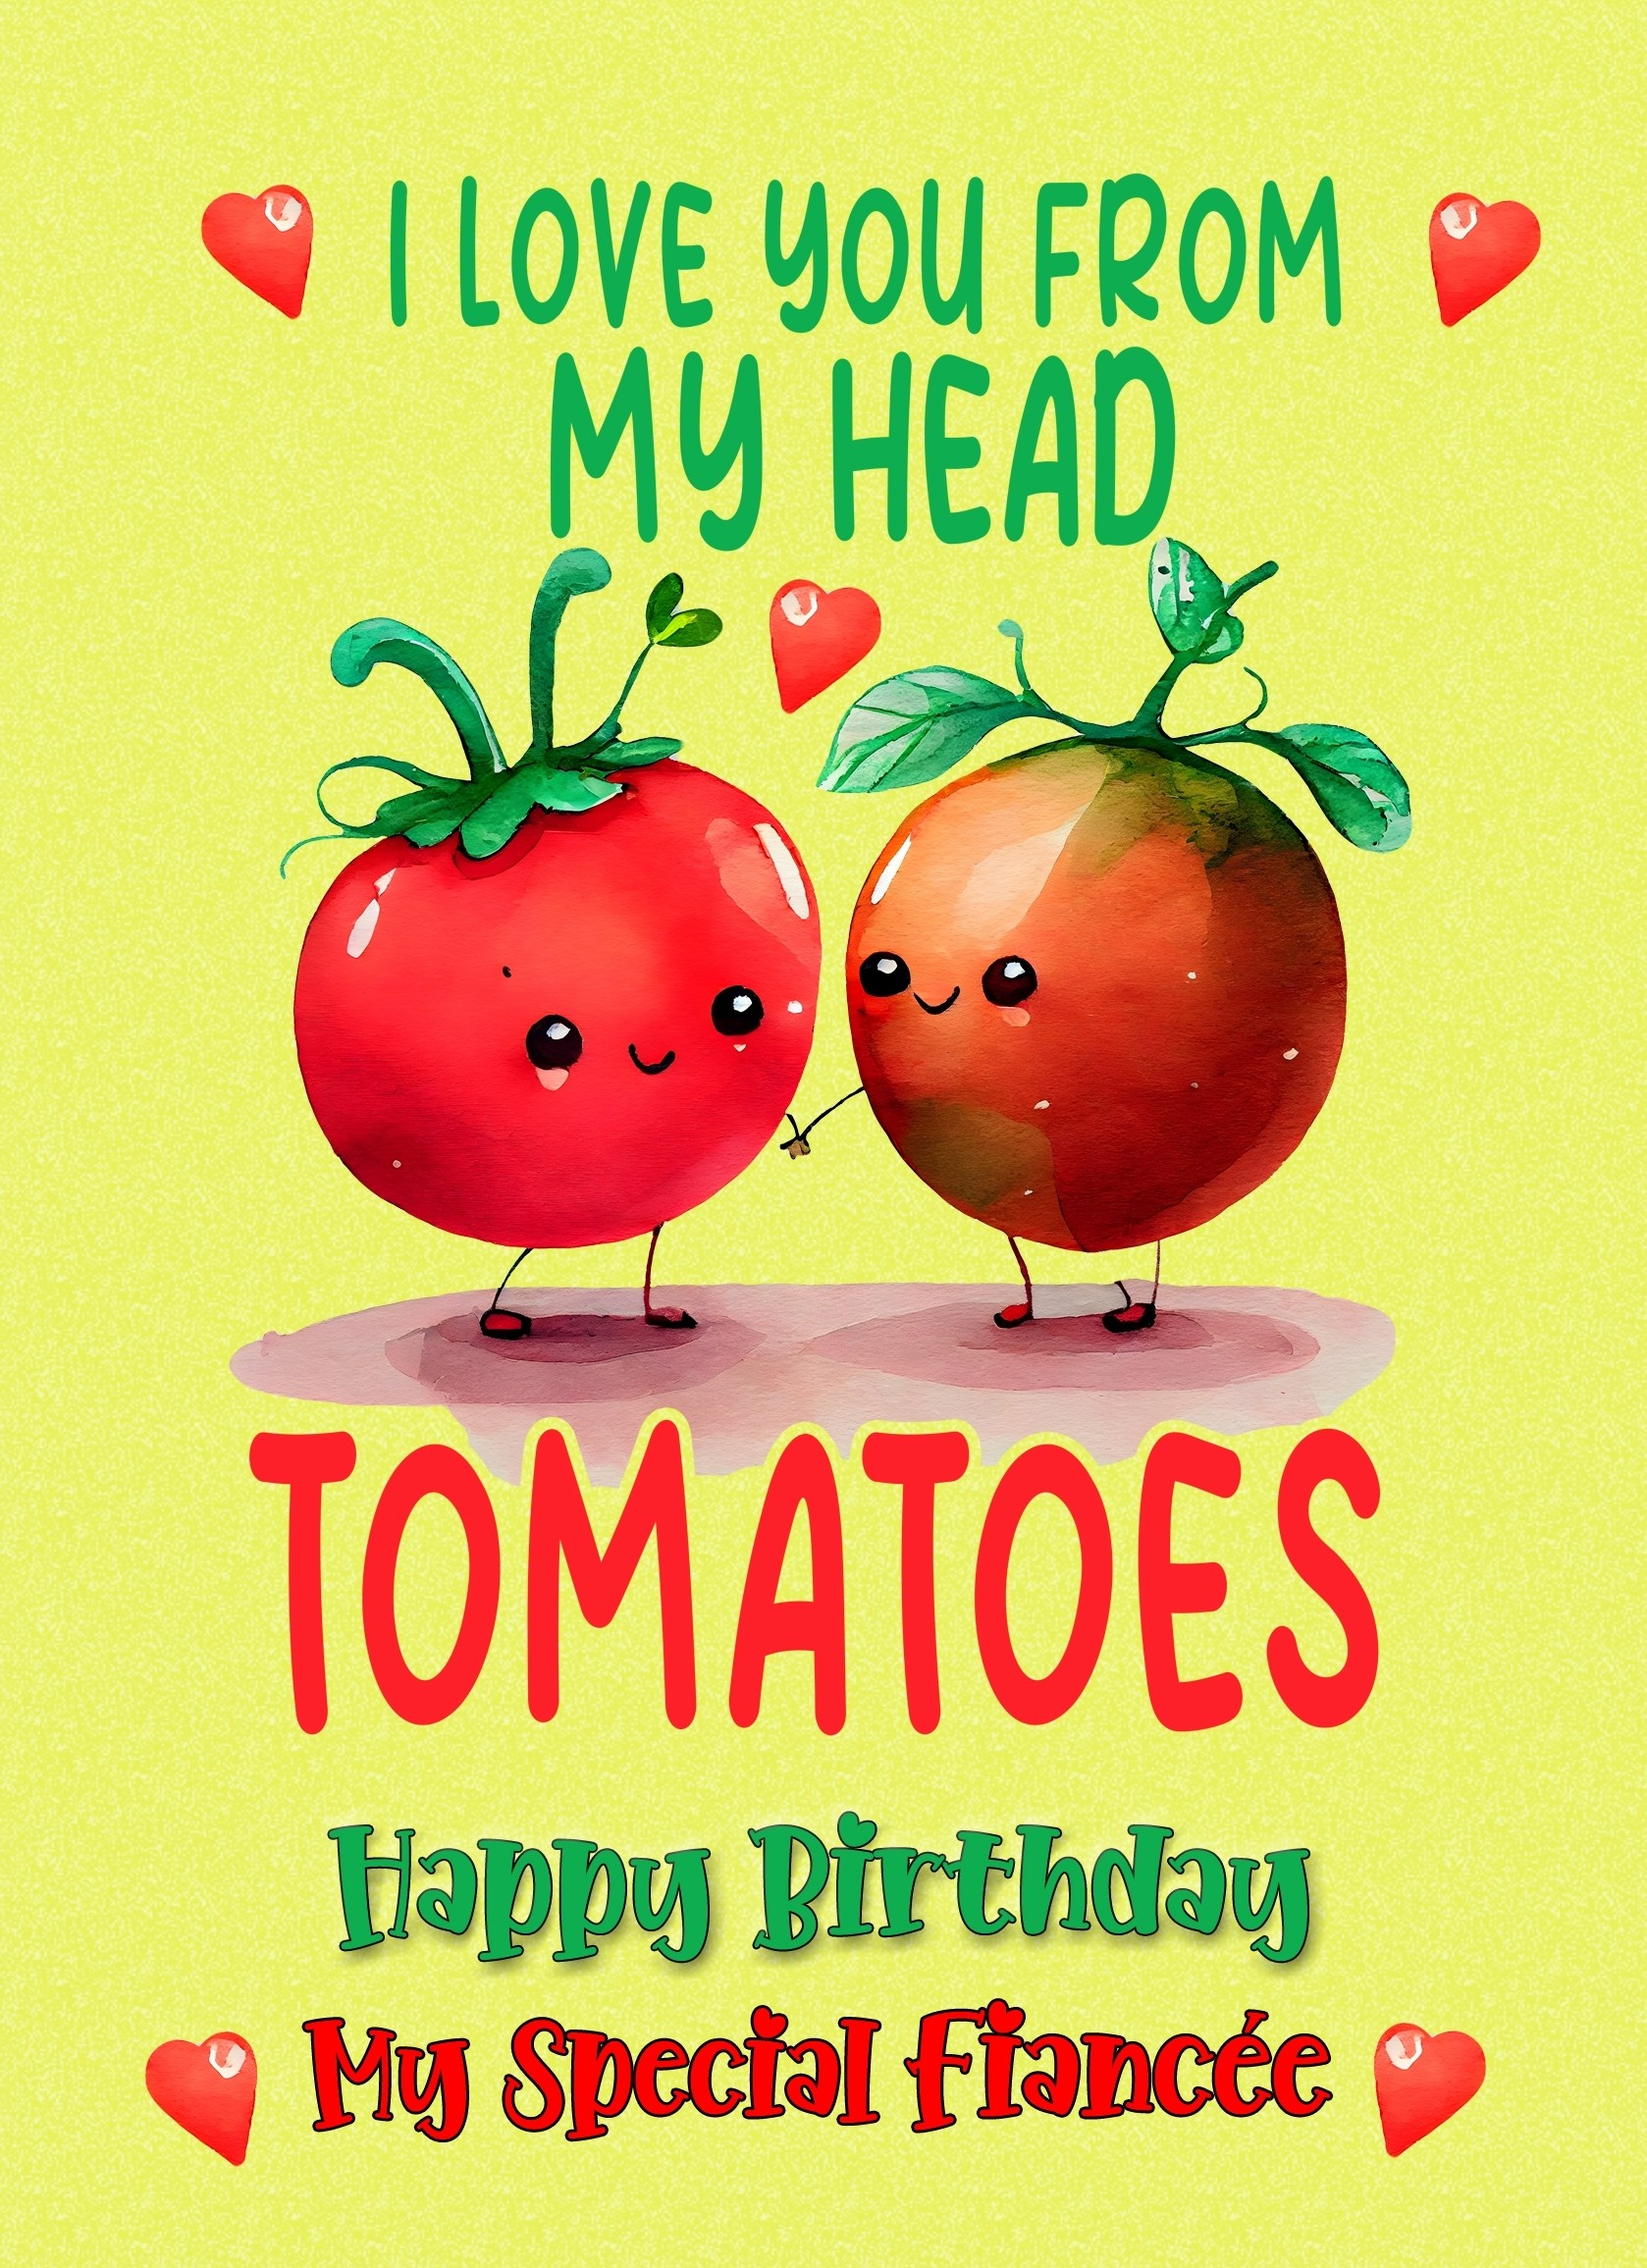 Funny Pun Romantic Birthday Card for Fiancee (Tomatoes)